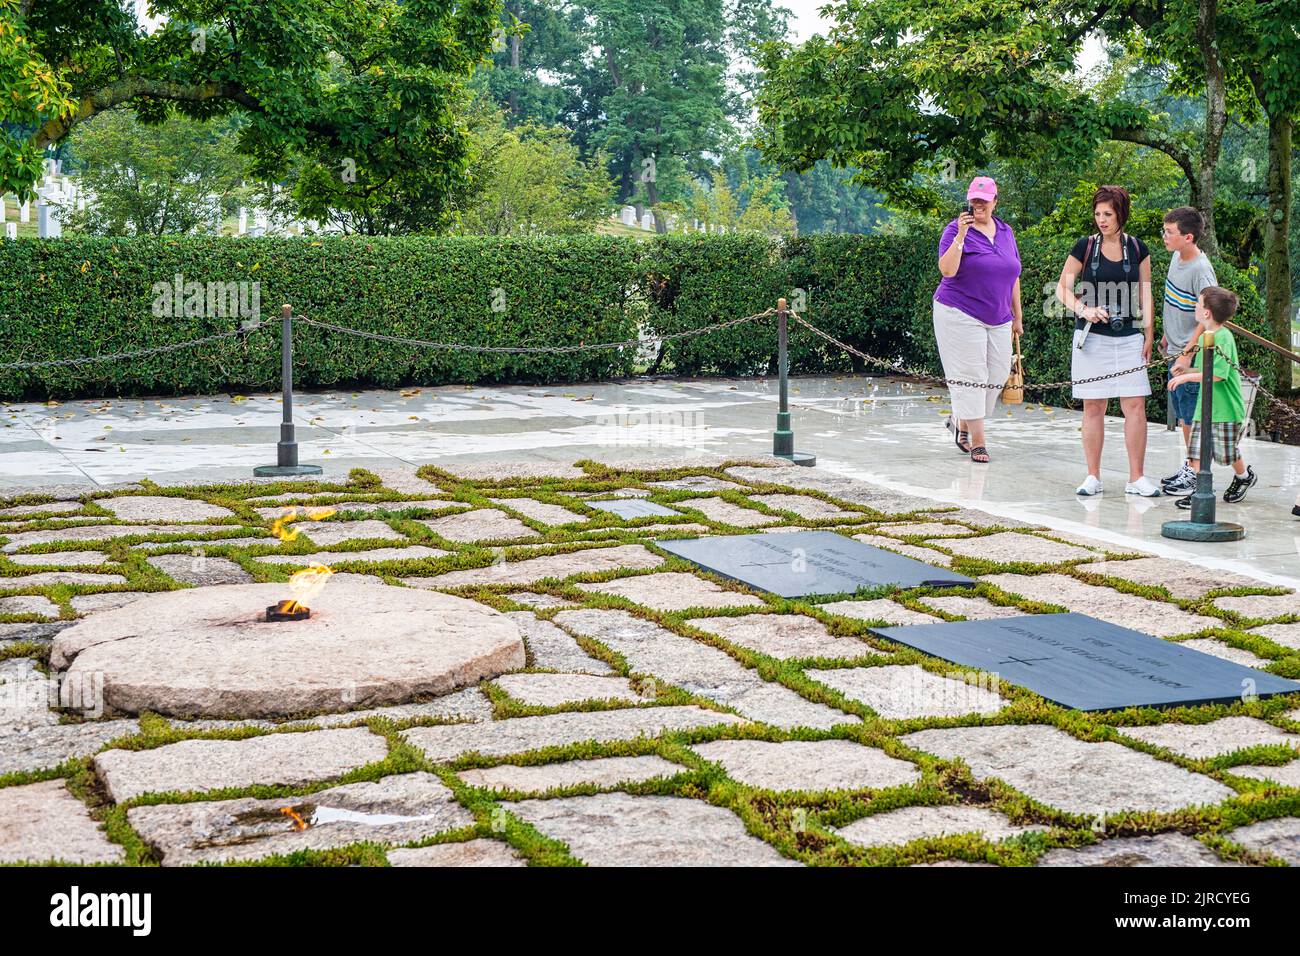 Visitors view the graves and eternal flame at the Kennedy Gravesite in Arlington National Cemetery across the Potomac River from Washington, D.C. Stock Photo